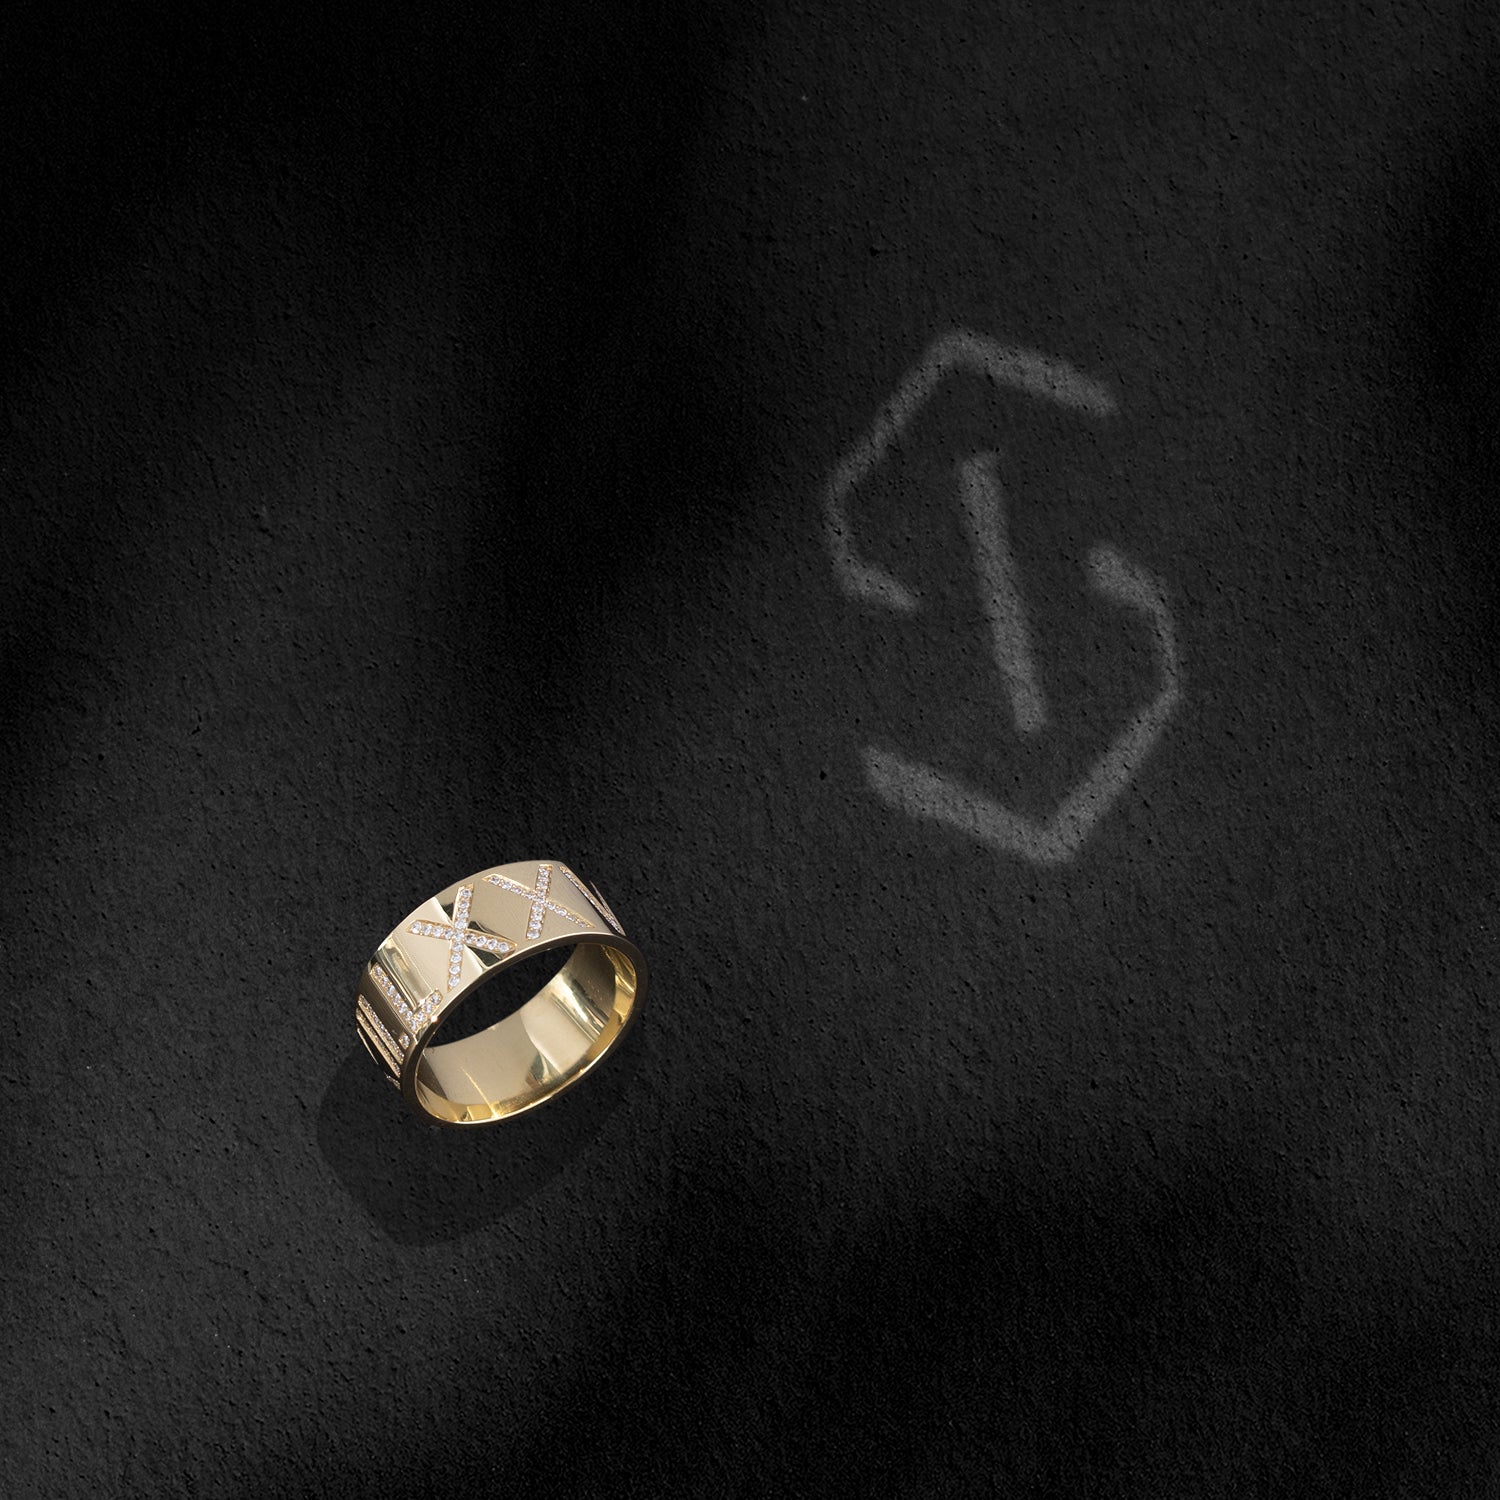 An ILA SODHANI Celebration Ring in yellow gold with white diamonds set into the roman numerals, &quot;V.XII.LX&quot;; shown standing next to the ILA SODHANI logo cast in light onto a of a black background.